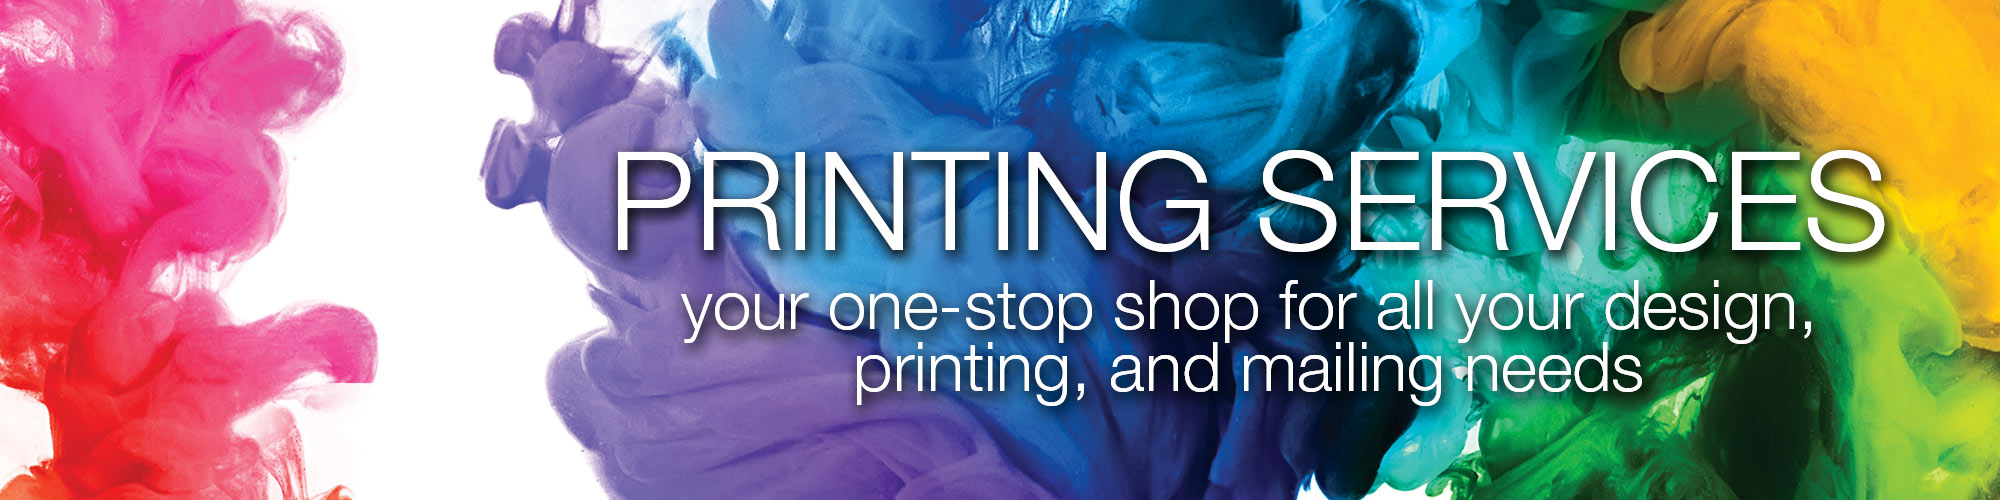 Printing Services: your one-stop shop for all your design, printing, and mailing needs